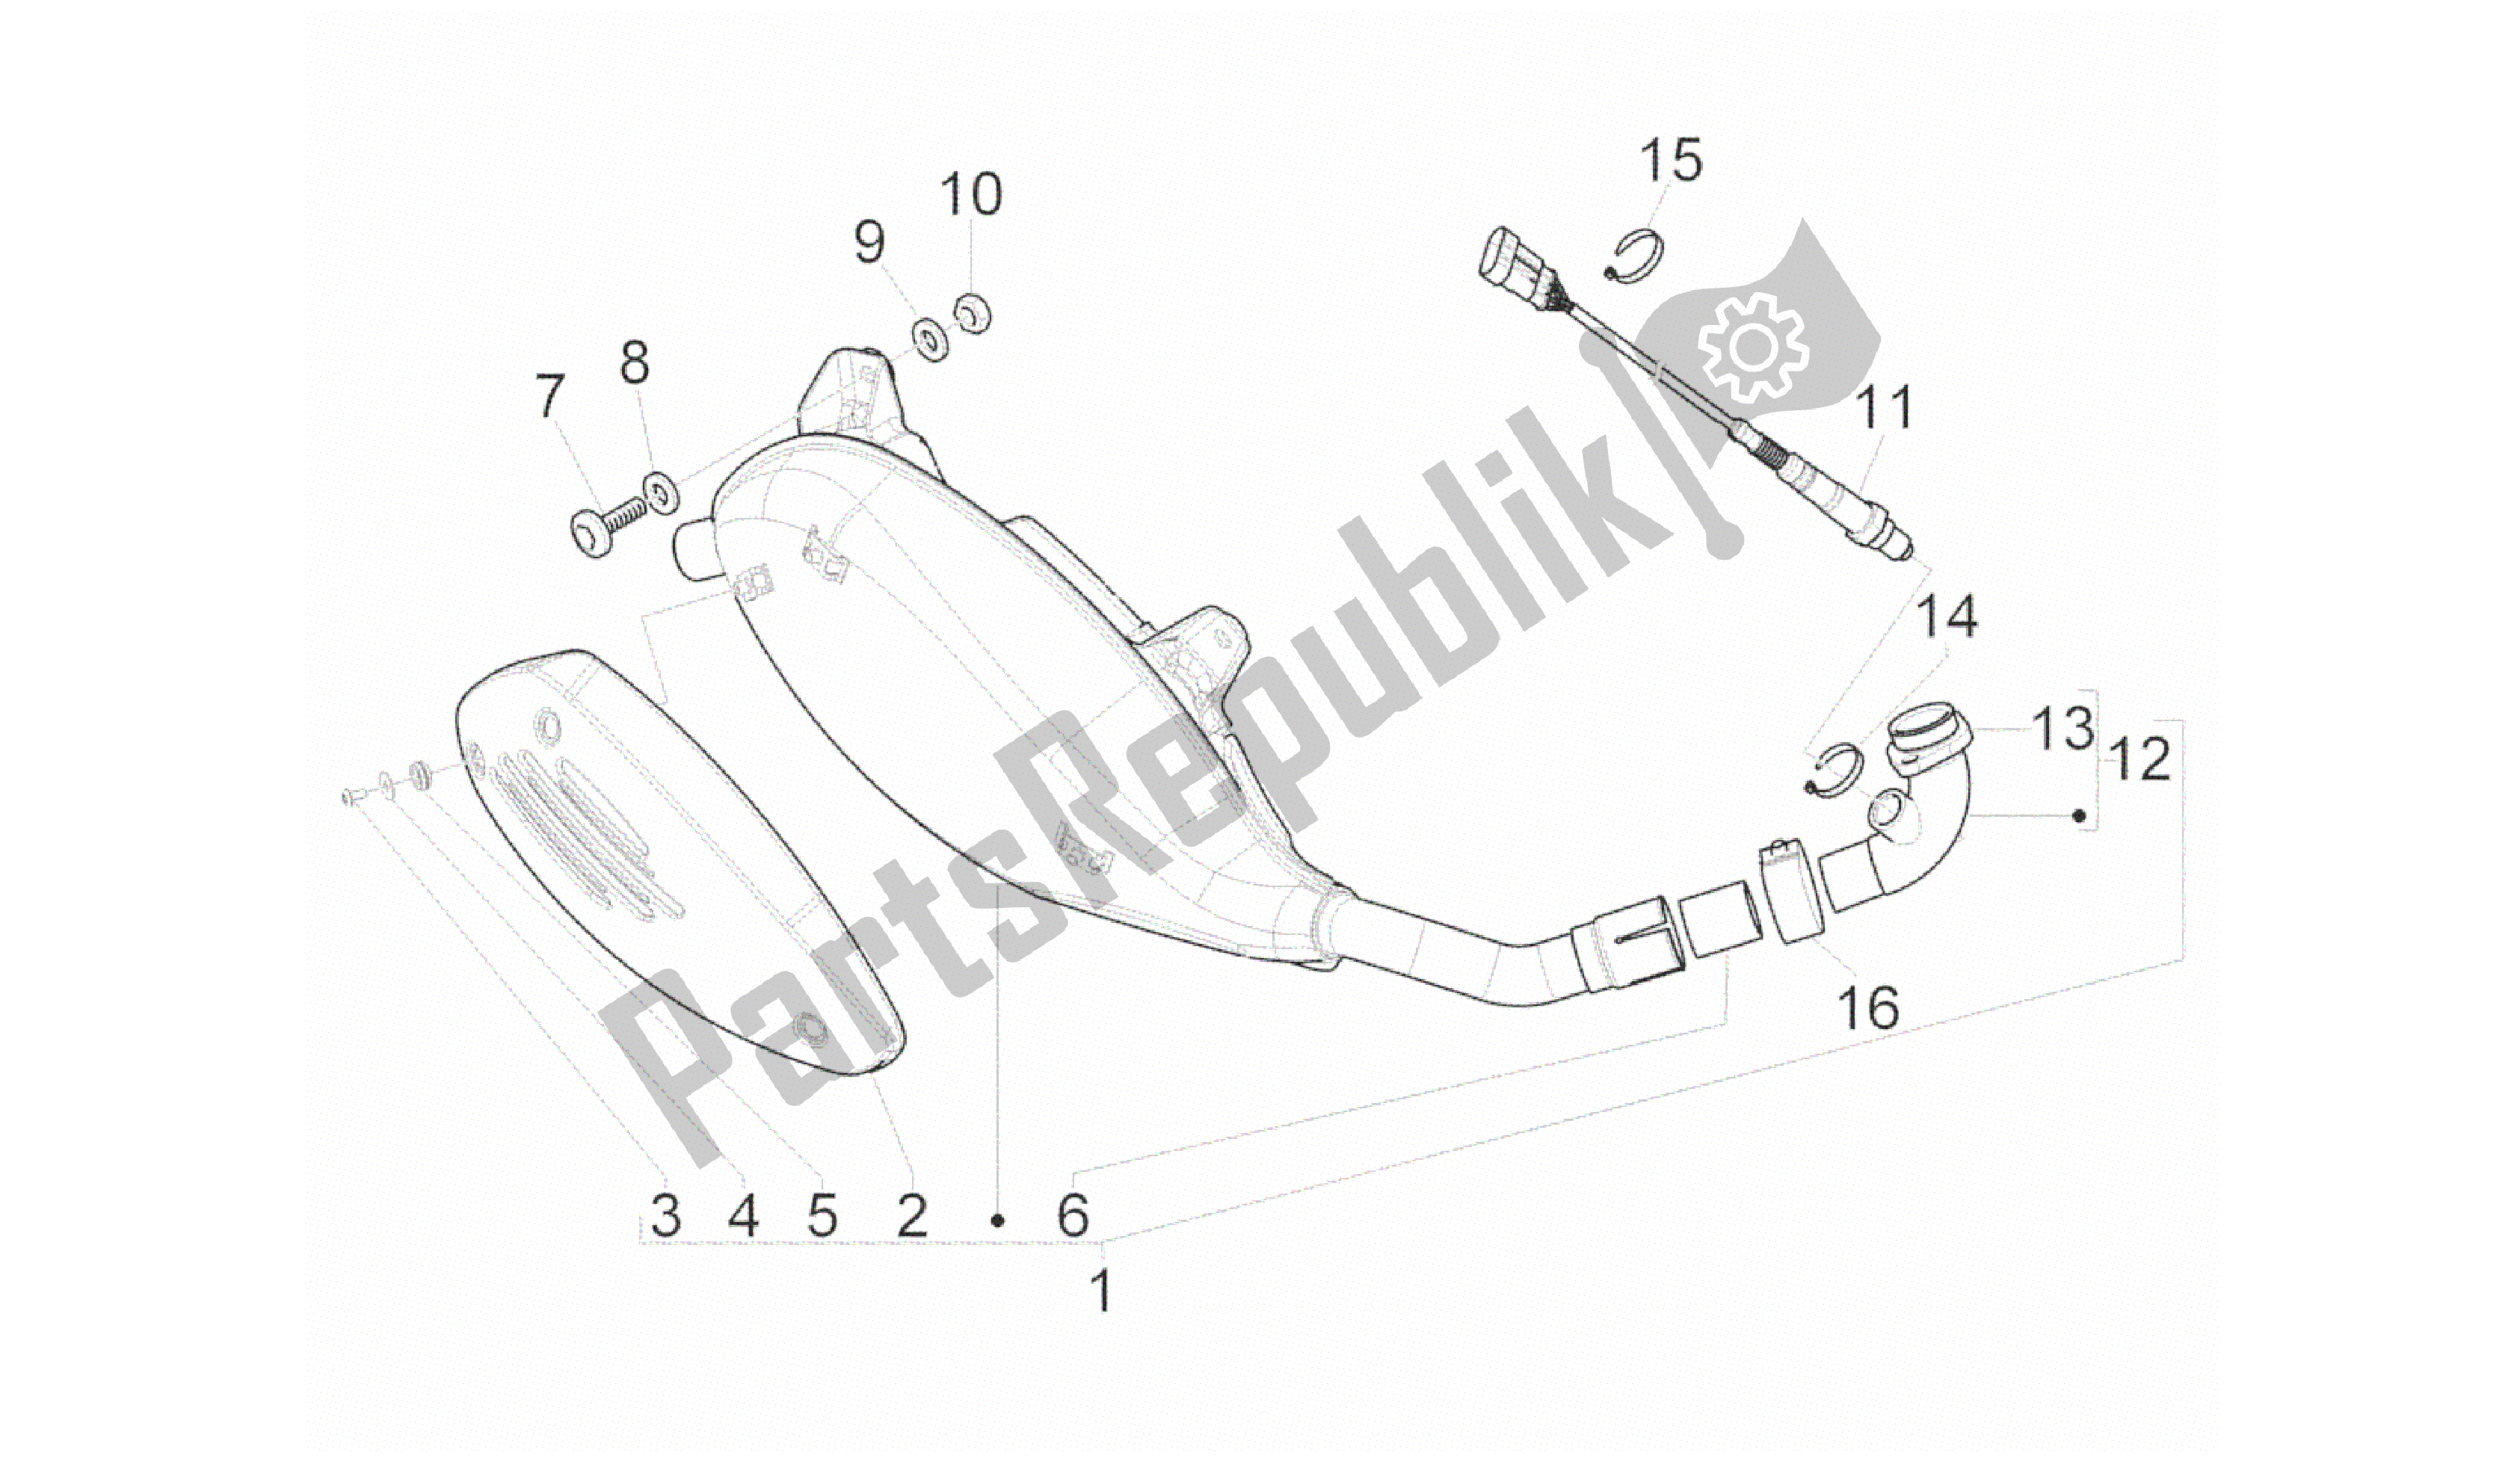 All parts for the Silenciador of the Vespa GTS 300 2011 - 2012